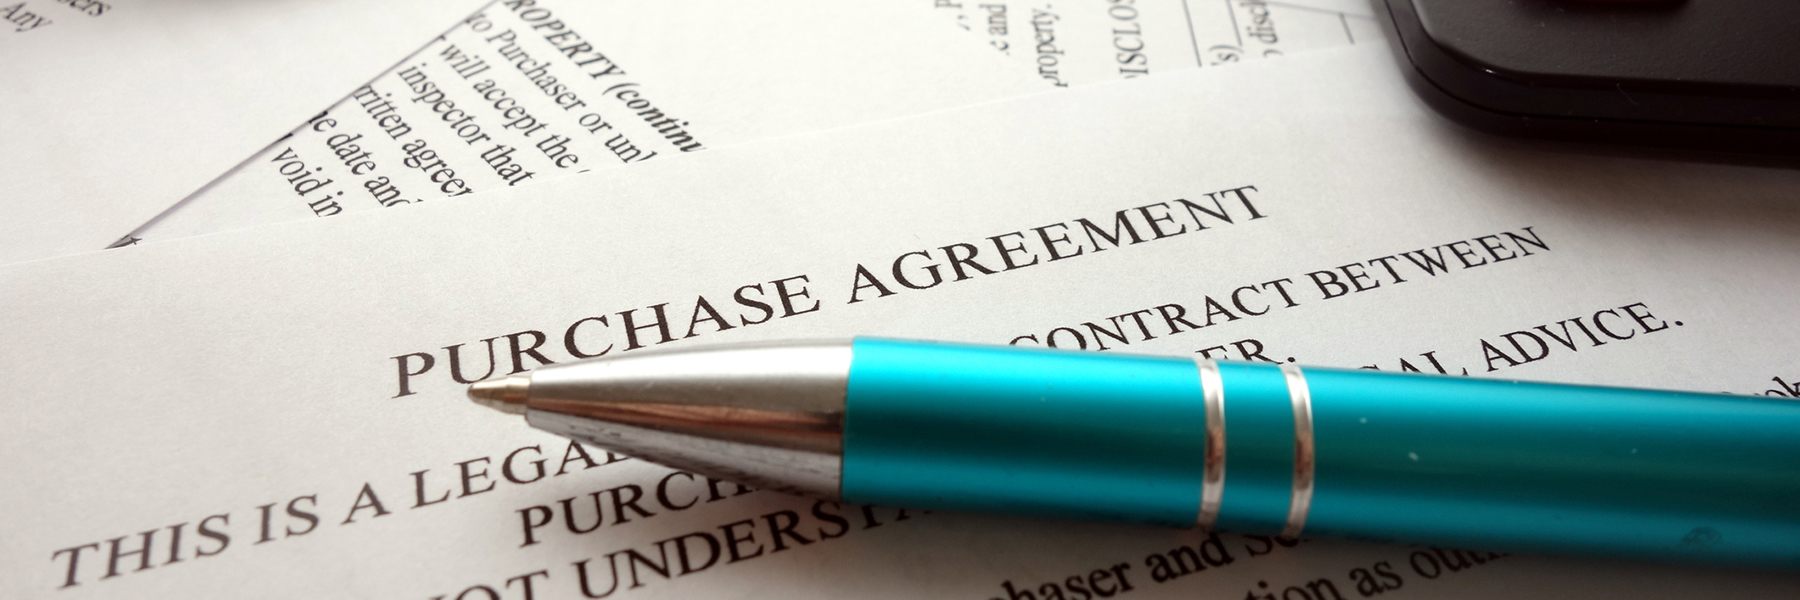 purchasing agreement contract